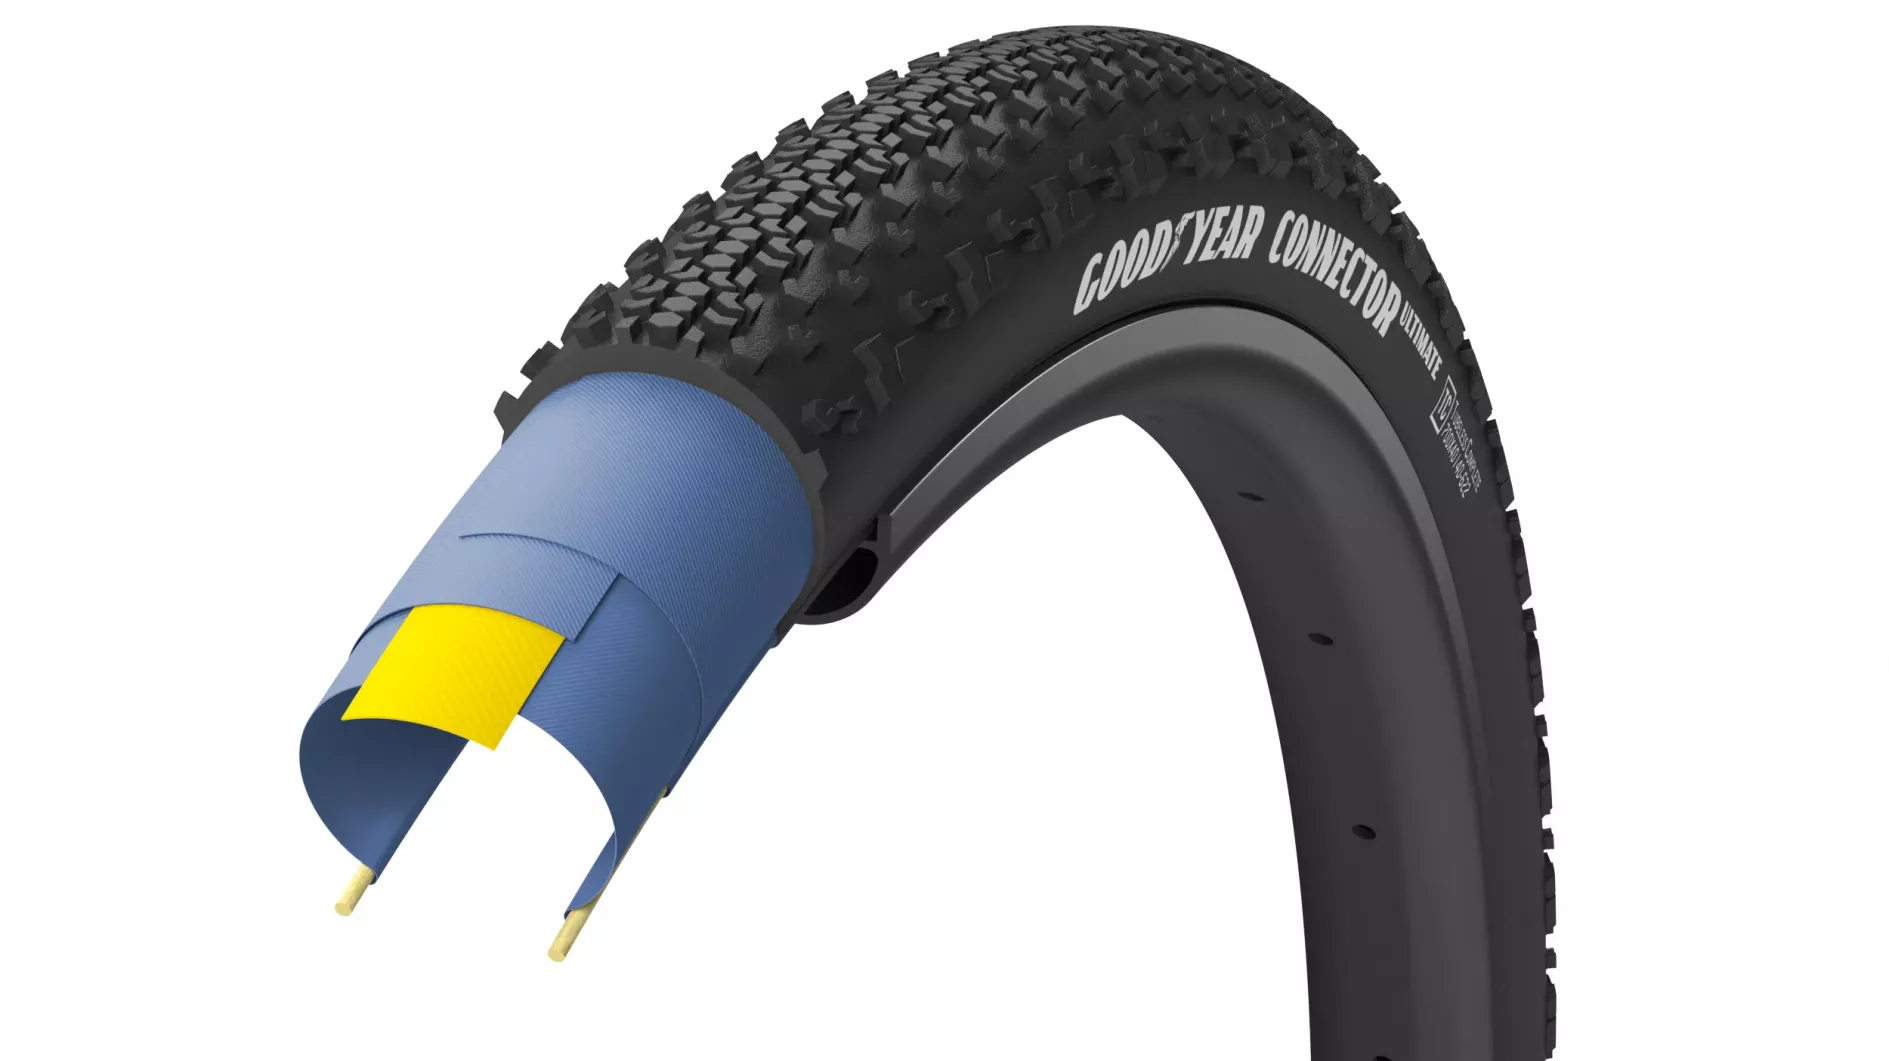 Фотографія Покришка GoodYear CONNECTOR tubeless complete 650x50 (50-584), folding, 120tpi, Чорна